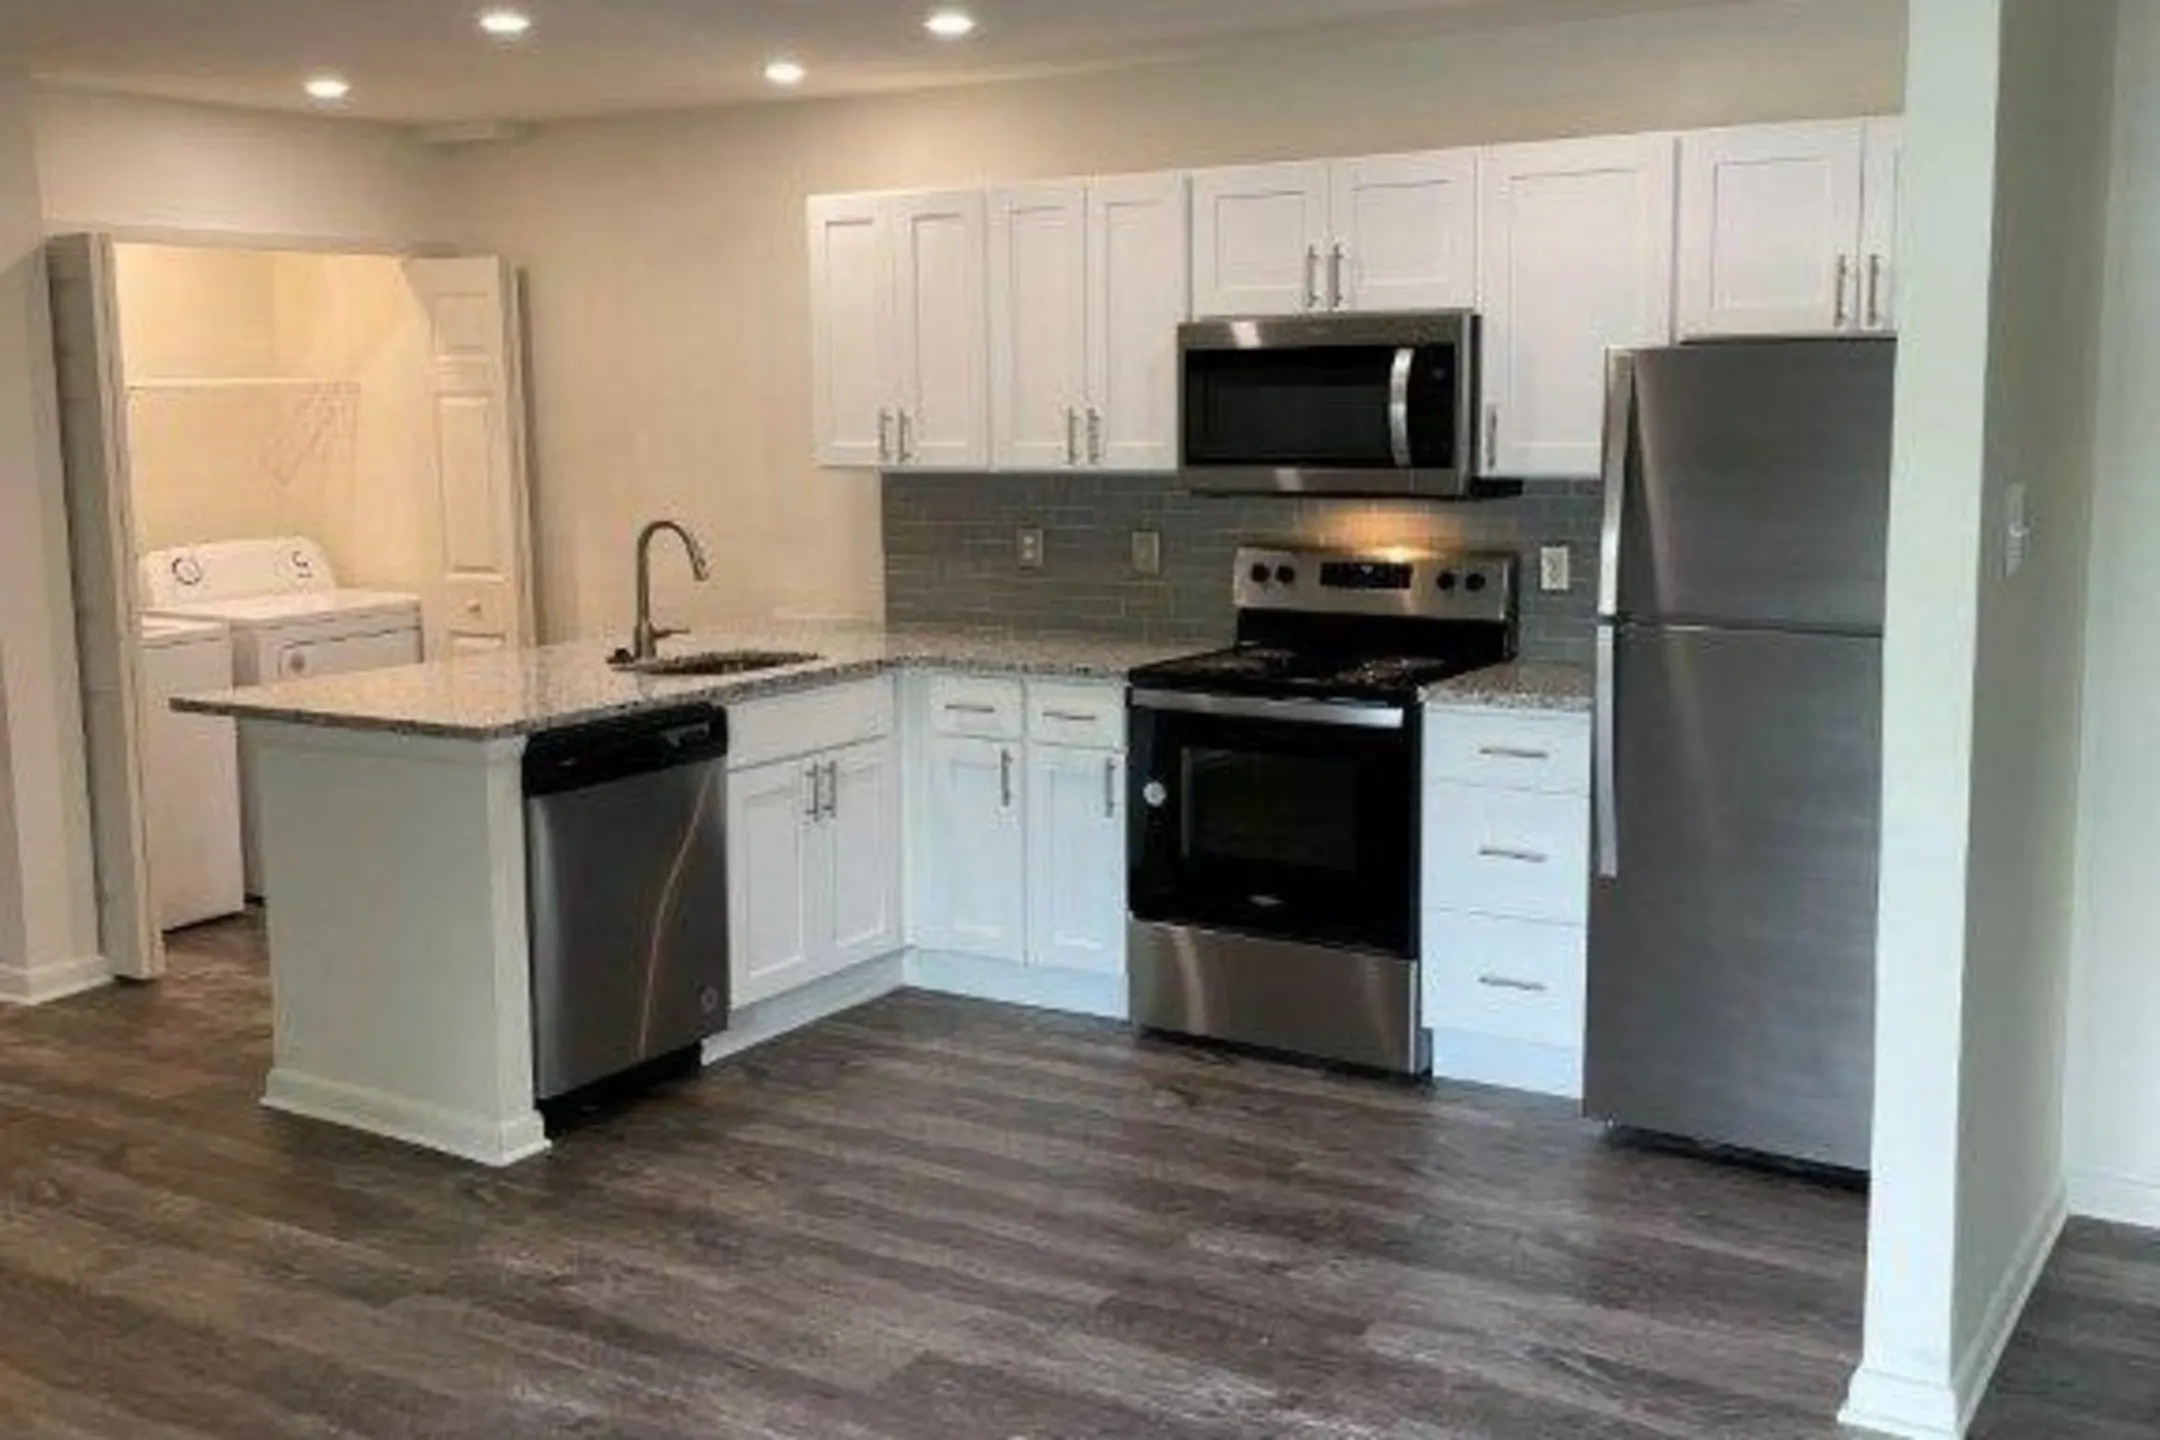 Kitchen - Main Street Apartment Homes - Lansdale, PA